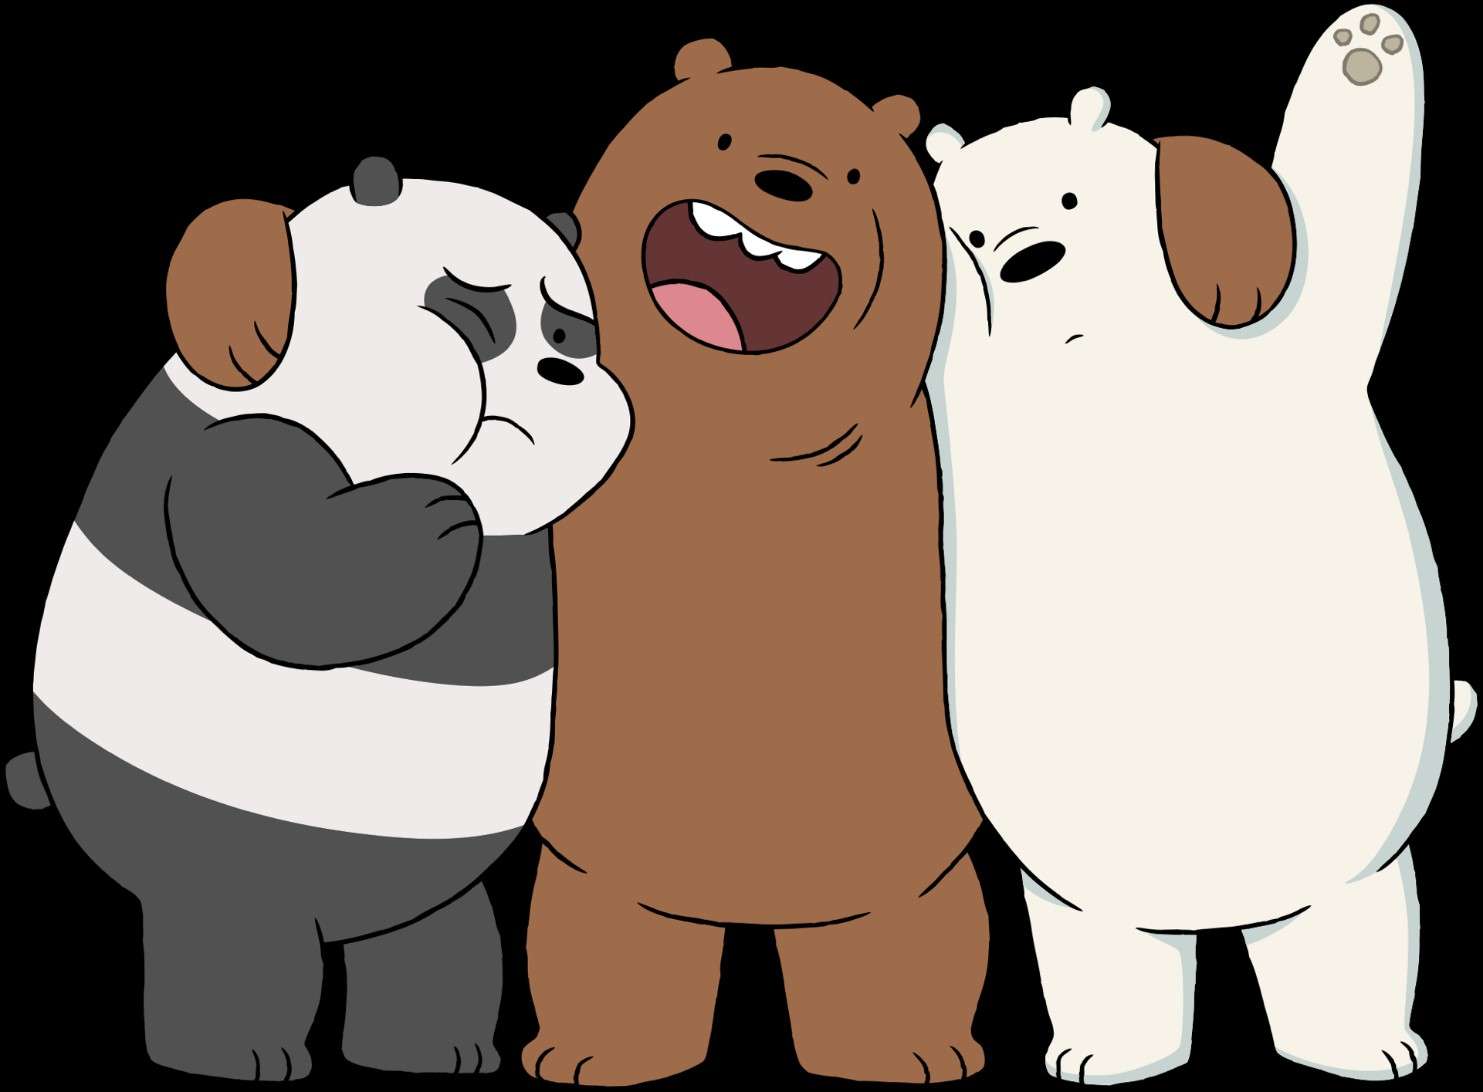 We bare bears puzzle online from photo